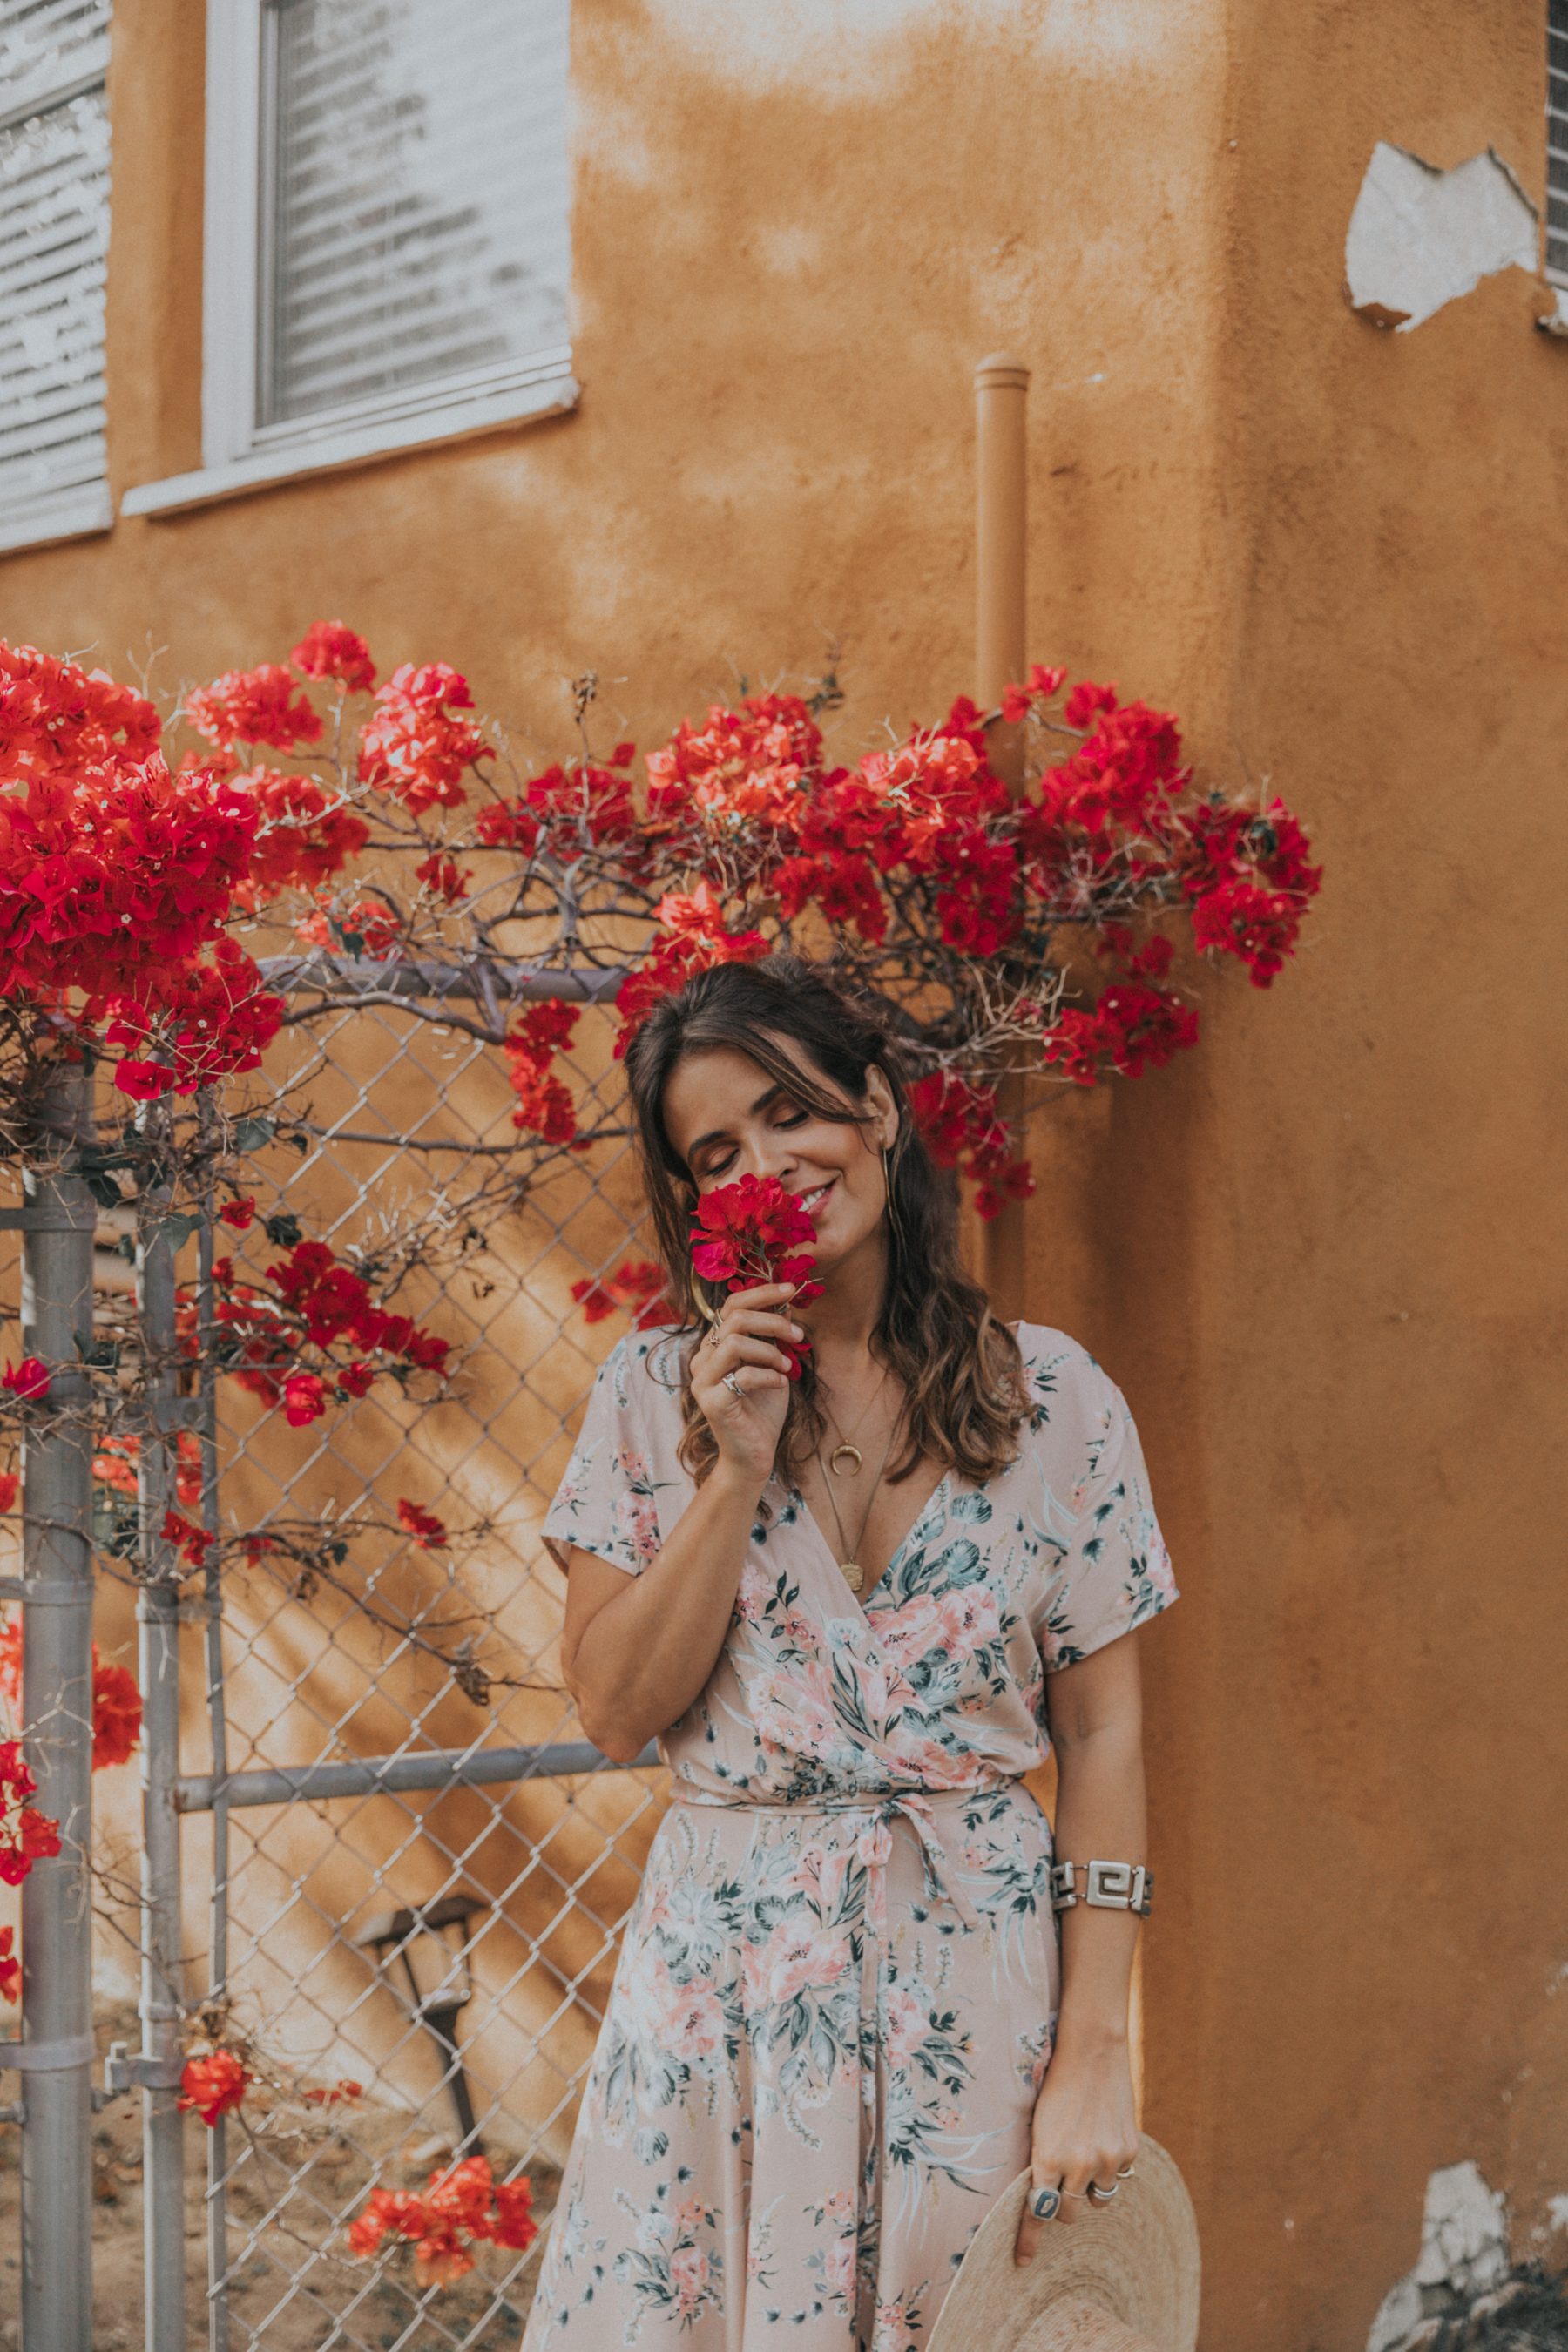 Fashion blogger Sara Escudero of Collage Vintage wearing Auguste the label summer floral dress